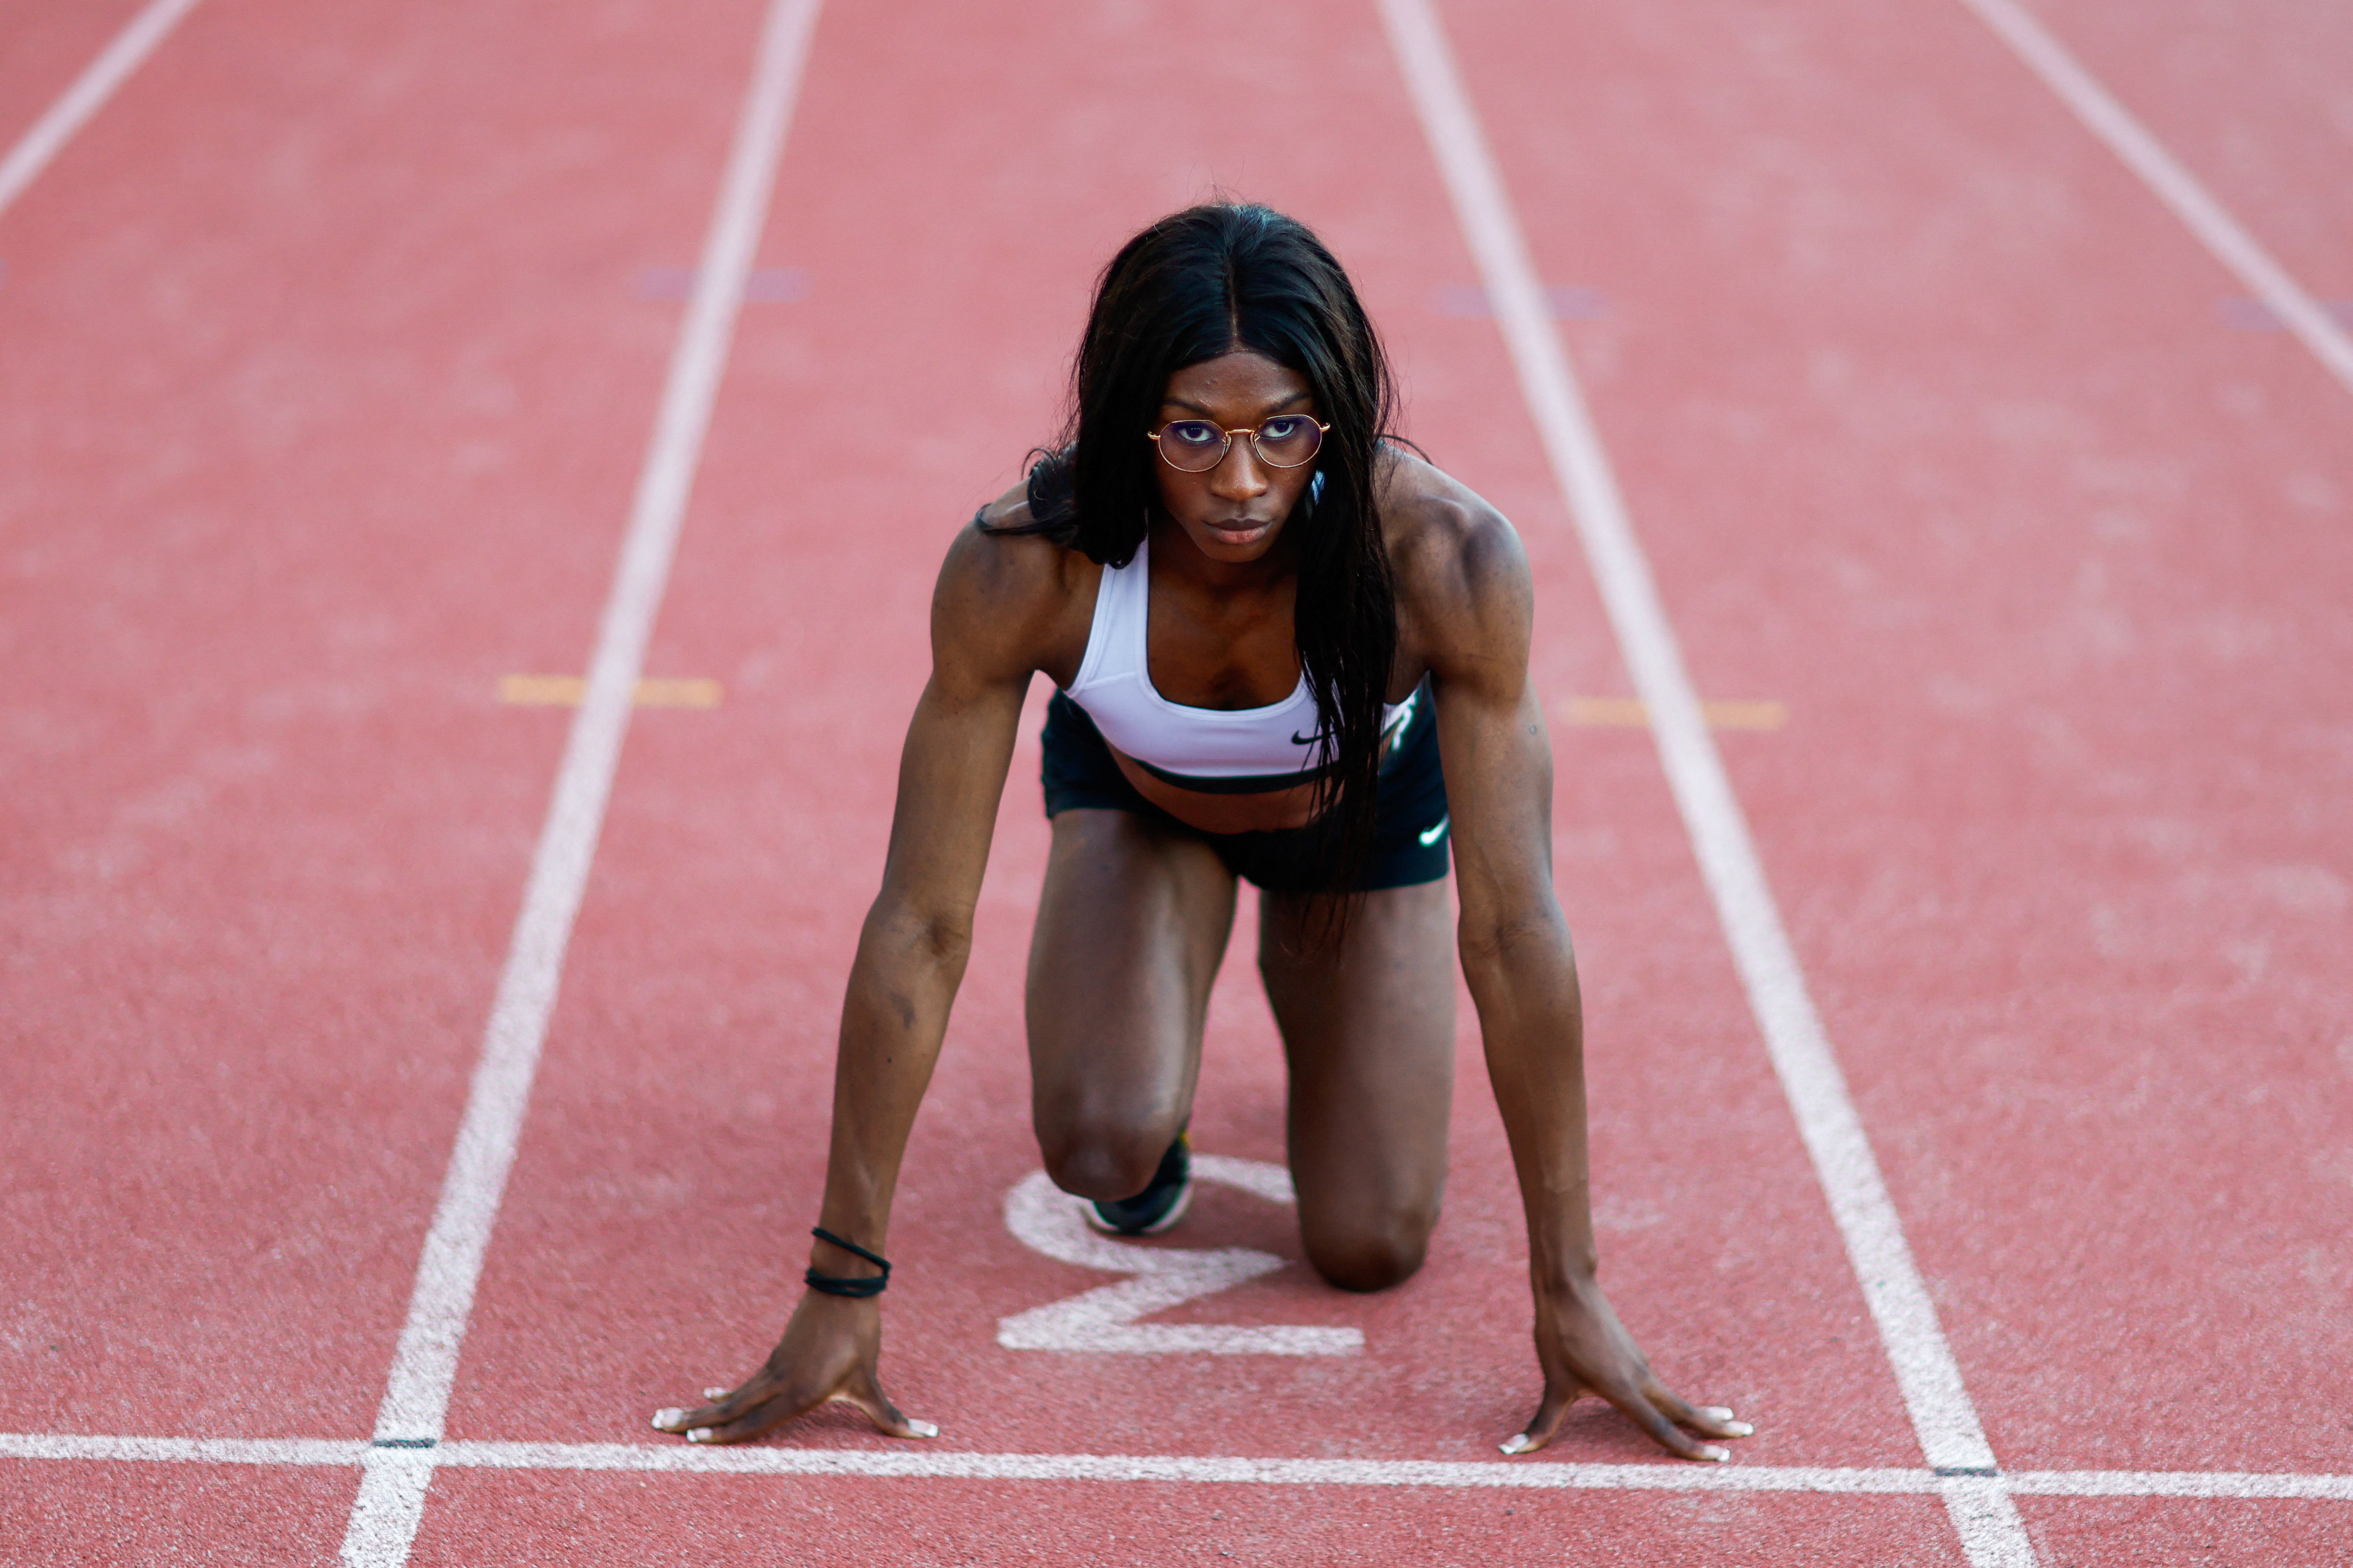 Sprinter Halba Diouf fights to represent transgender rights at Paris 2024 Olympics Games